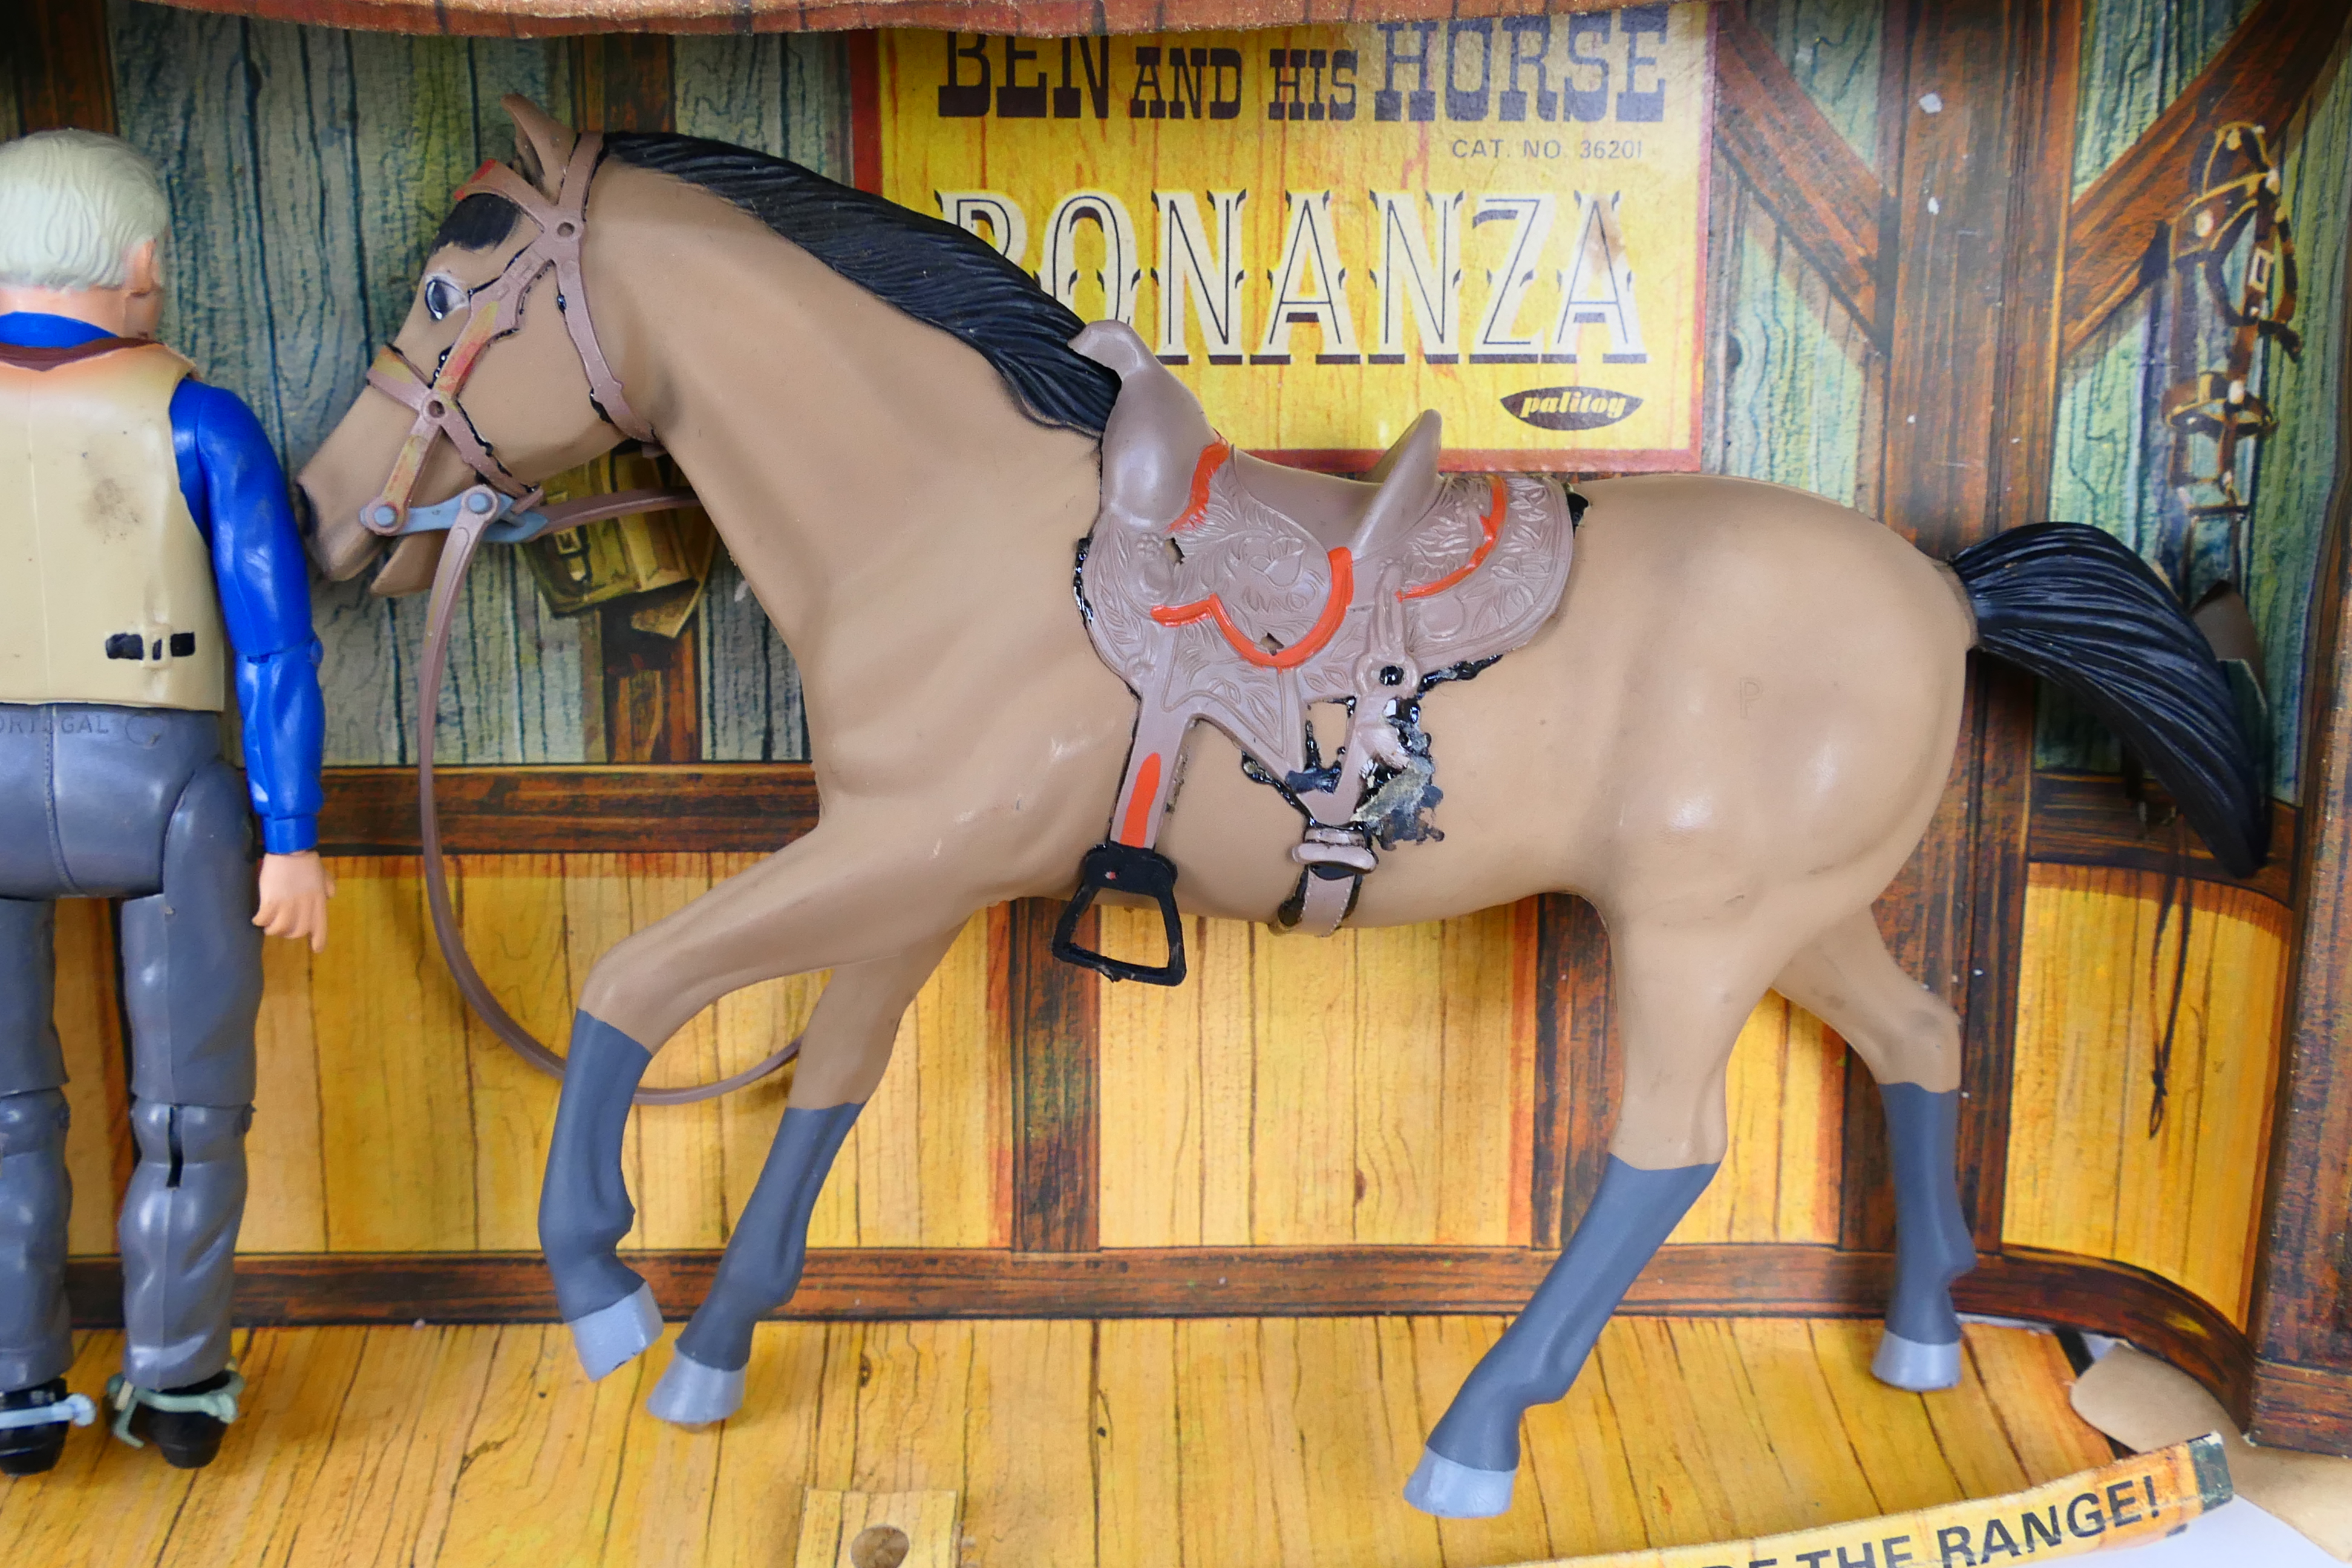 Palitoy - Bonanza - 2 x boxed sets, Ben And His Horse # 36201 and Hoss And His Horse # 36203. - Image 12 of 14